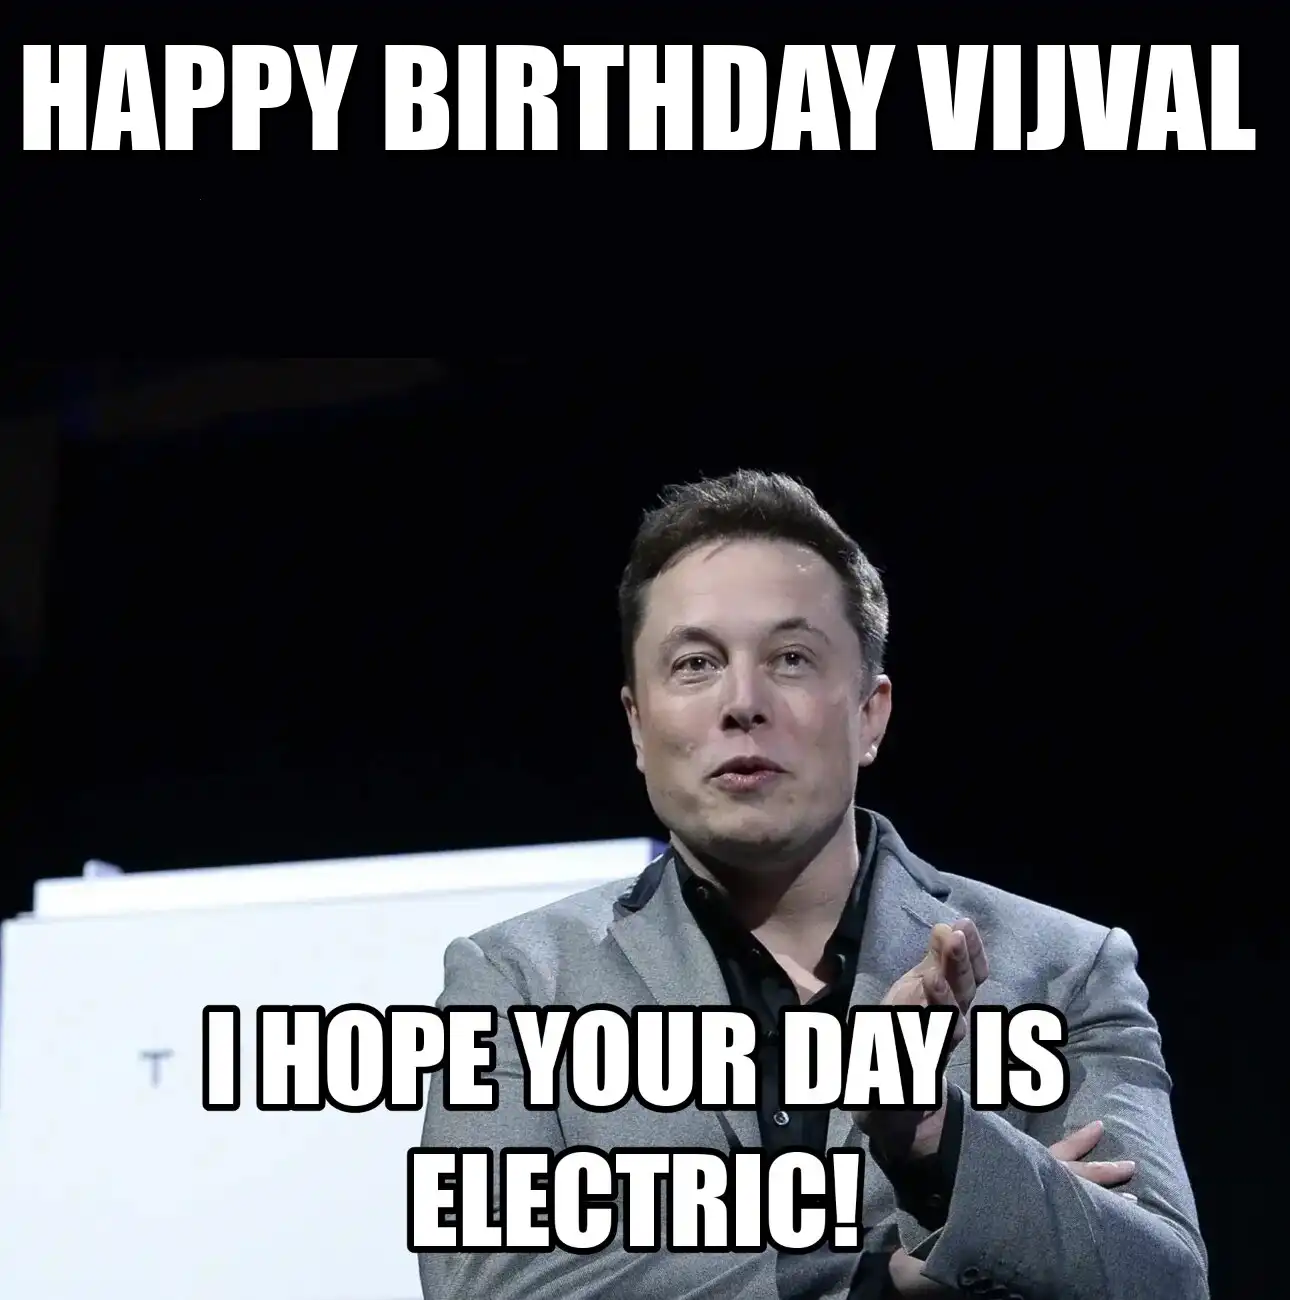 Happy Birthday Vijval I Hope Your Day Is Electric Meme